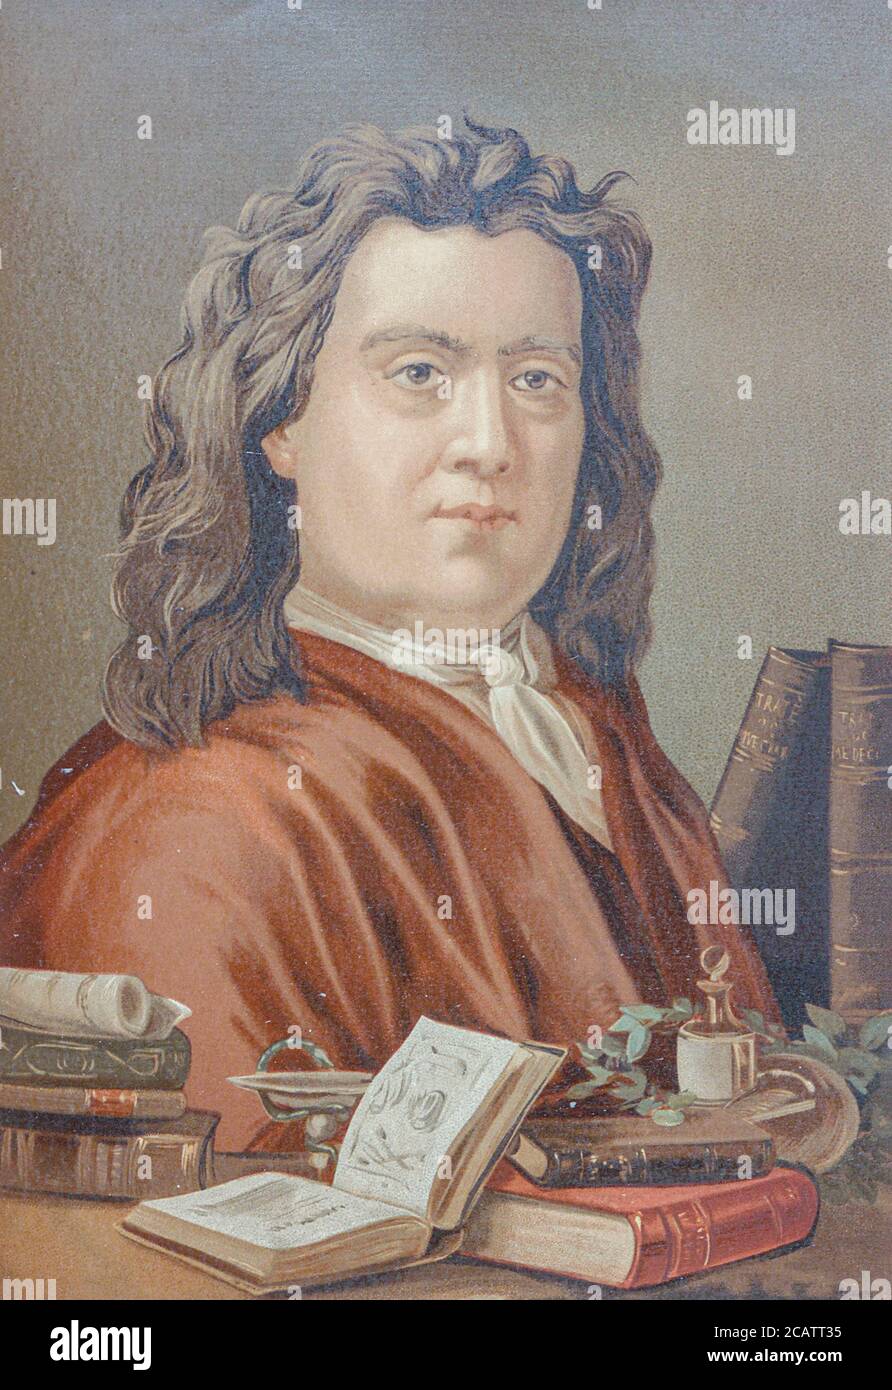 Herman Boerhaave (31 December 1668 – 23 September 1738) was a Dutch botanist, chemist, Christian humanist, and physician of European fame. He is regarded as the founder of clinical teaching and of the modern academic hospital and is sometimes referred to as 'the father of physiology,' Boerhaave introduced the quantitative approach into medicine. From the book La ciencia y sus hombres : vidas de los sabios ilustres desde la antigüedad hasta el siglo XIX T. 3  [Science and its men: lives of the illustrious sages from antiquity to the 19th century Vol 3] By by Figuier, Louis, (1819-1894); Casabó Stock Photo